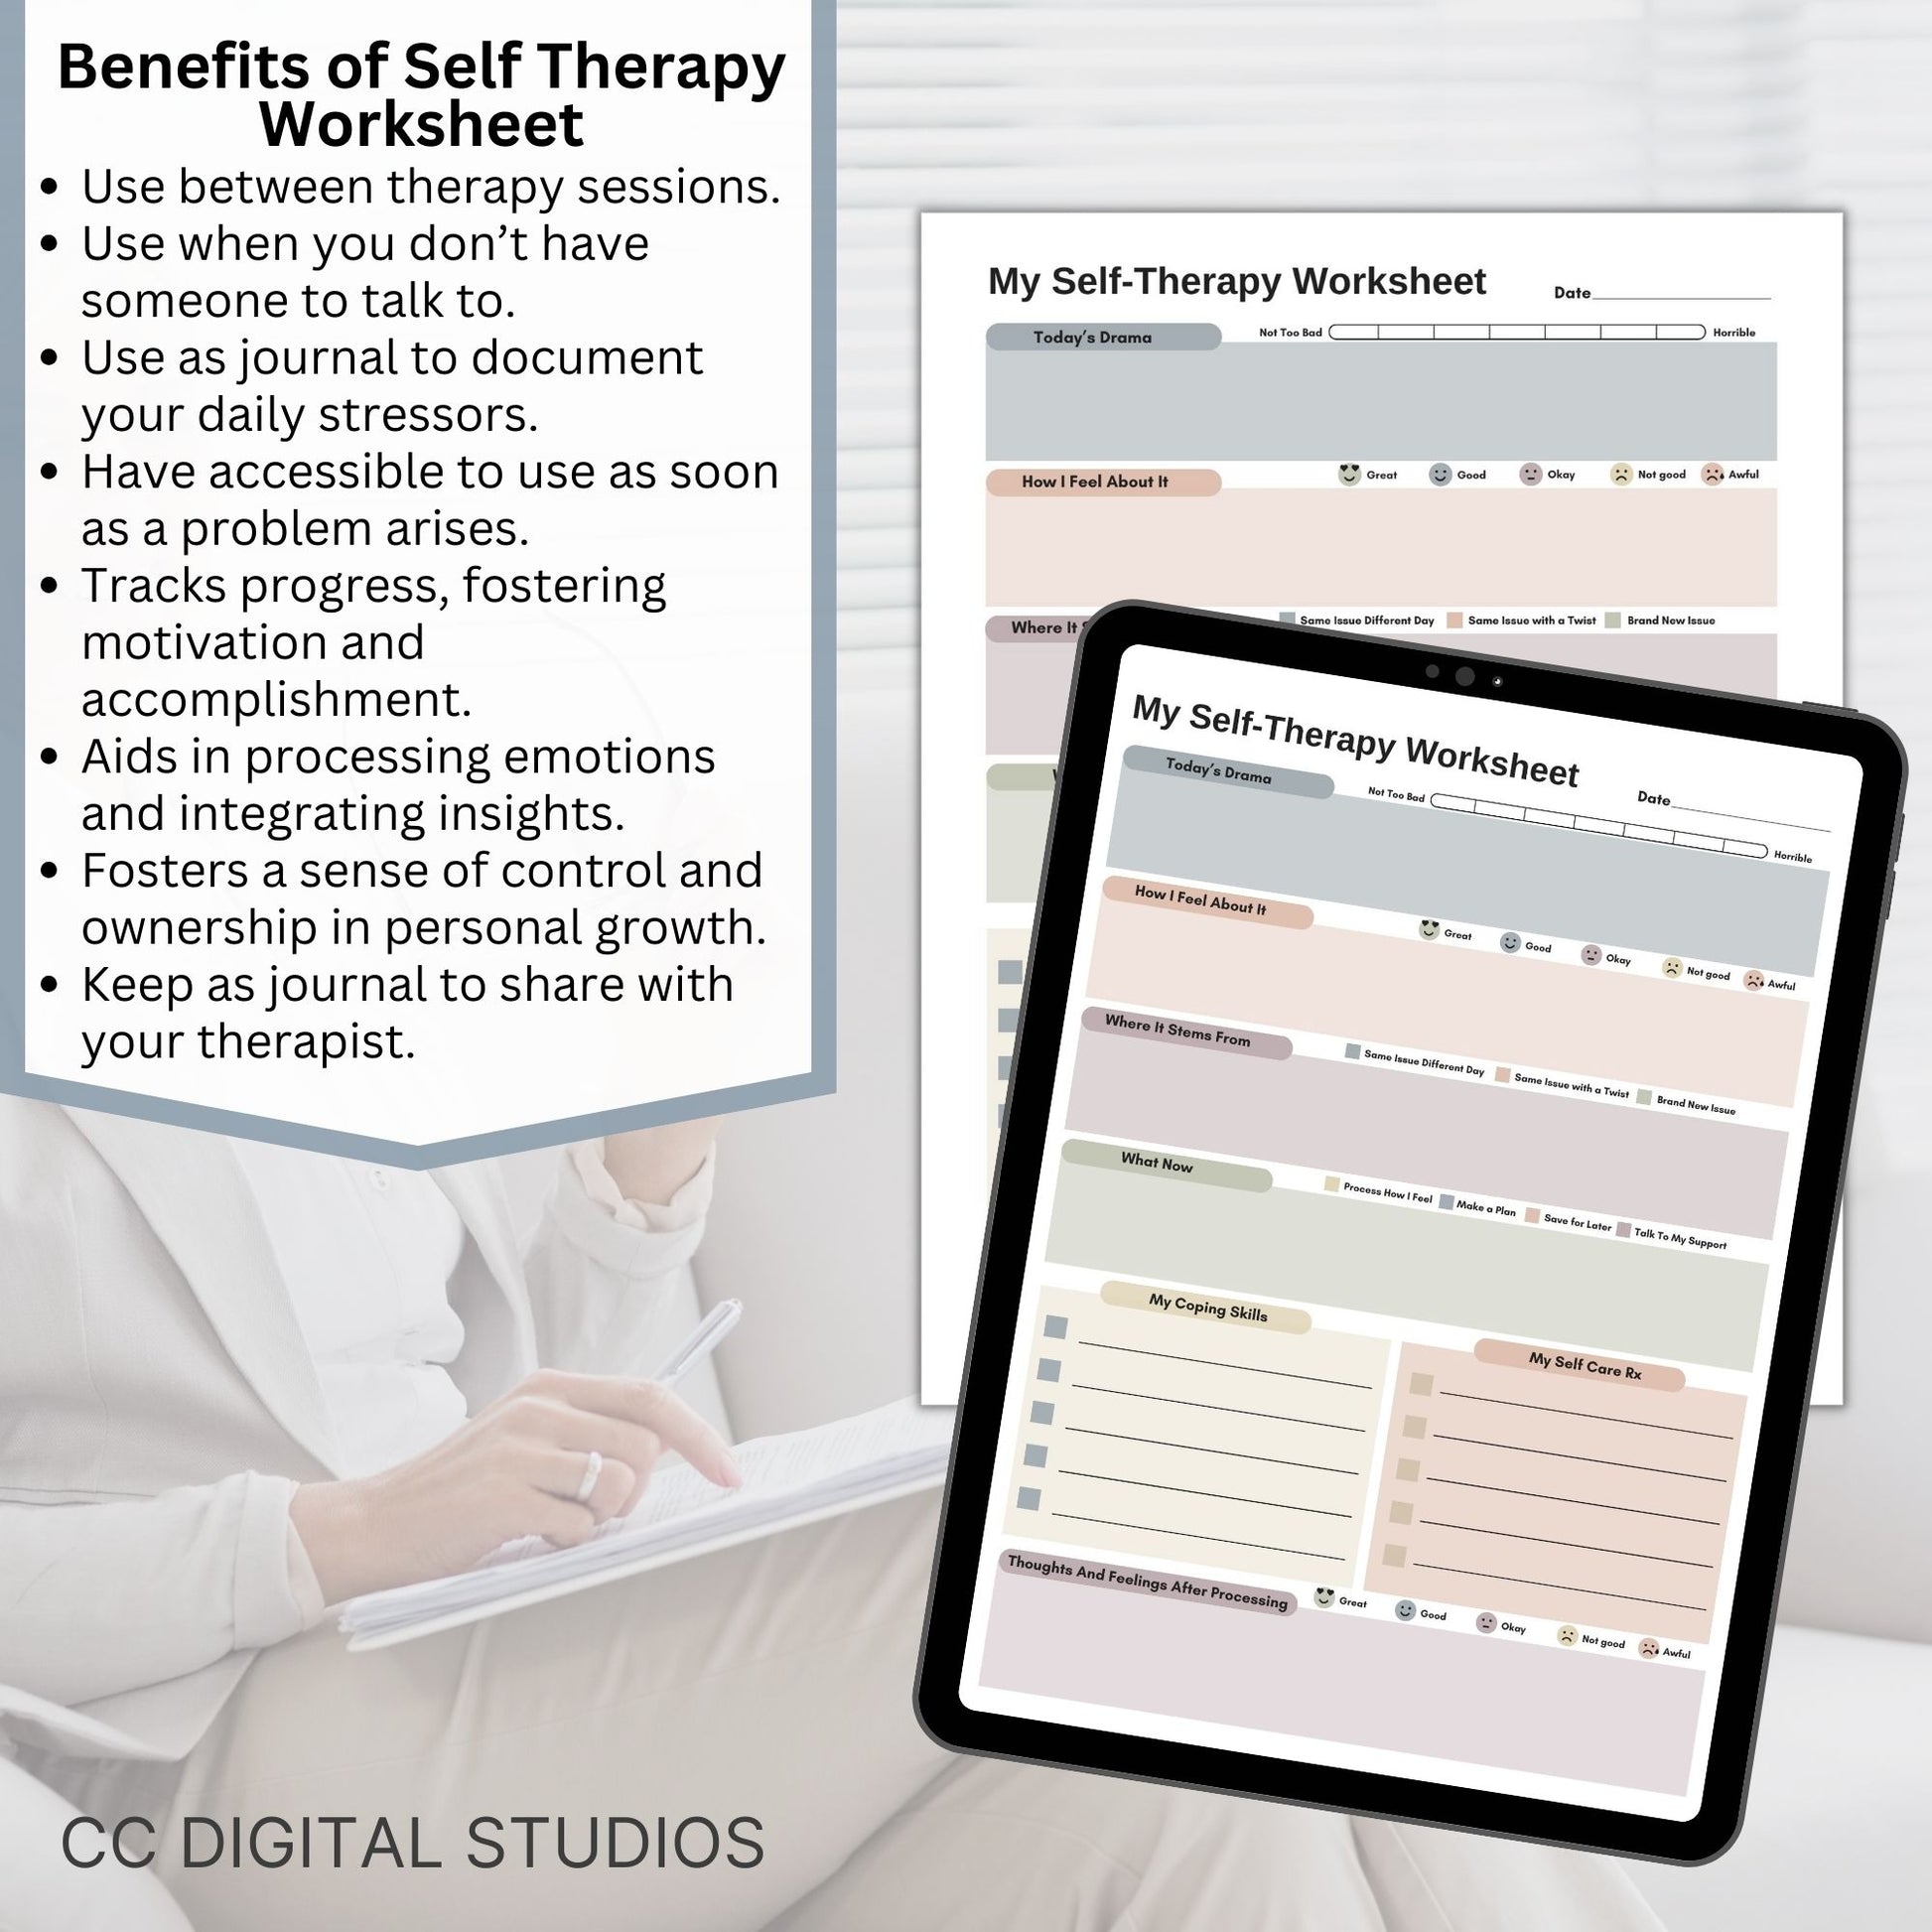 CBT worksheet for self-therapy, self-care, and processing anxiety and life stressors.  This therapy journal page with structured prompts empowers you to process challenges, develop healthier thought patterns